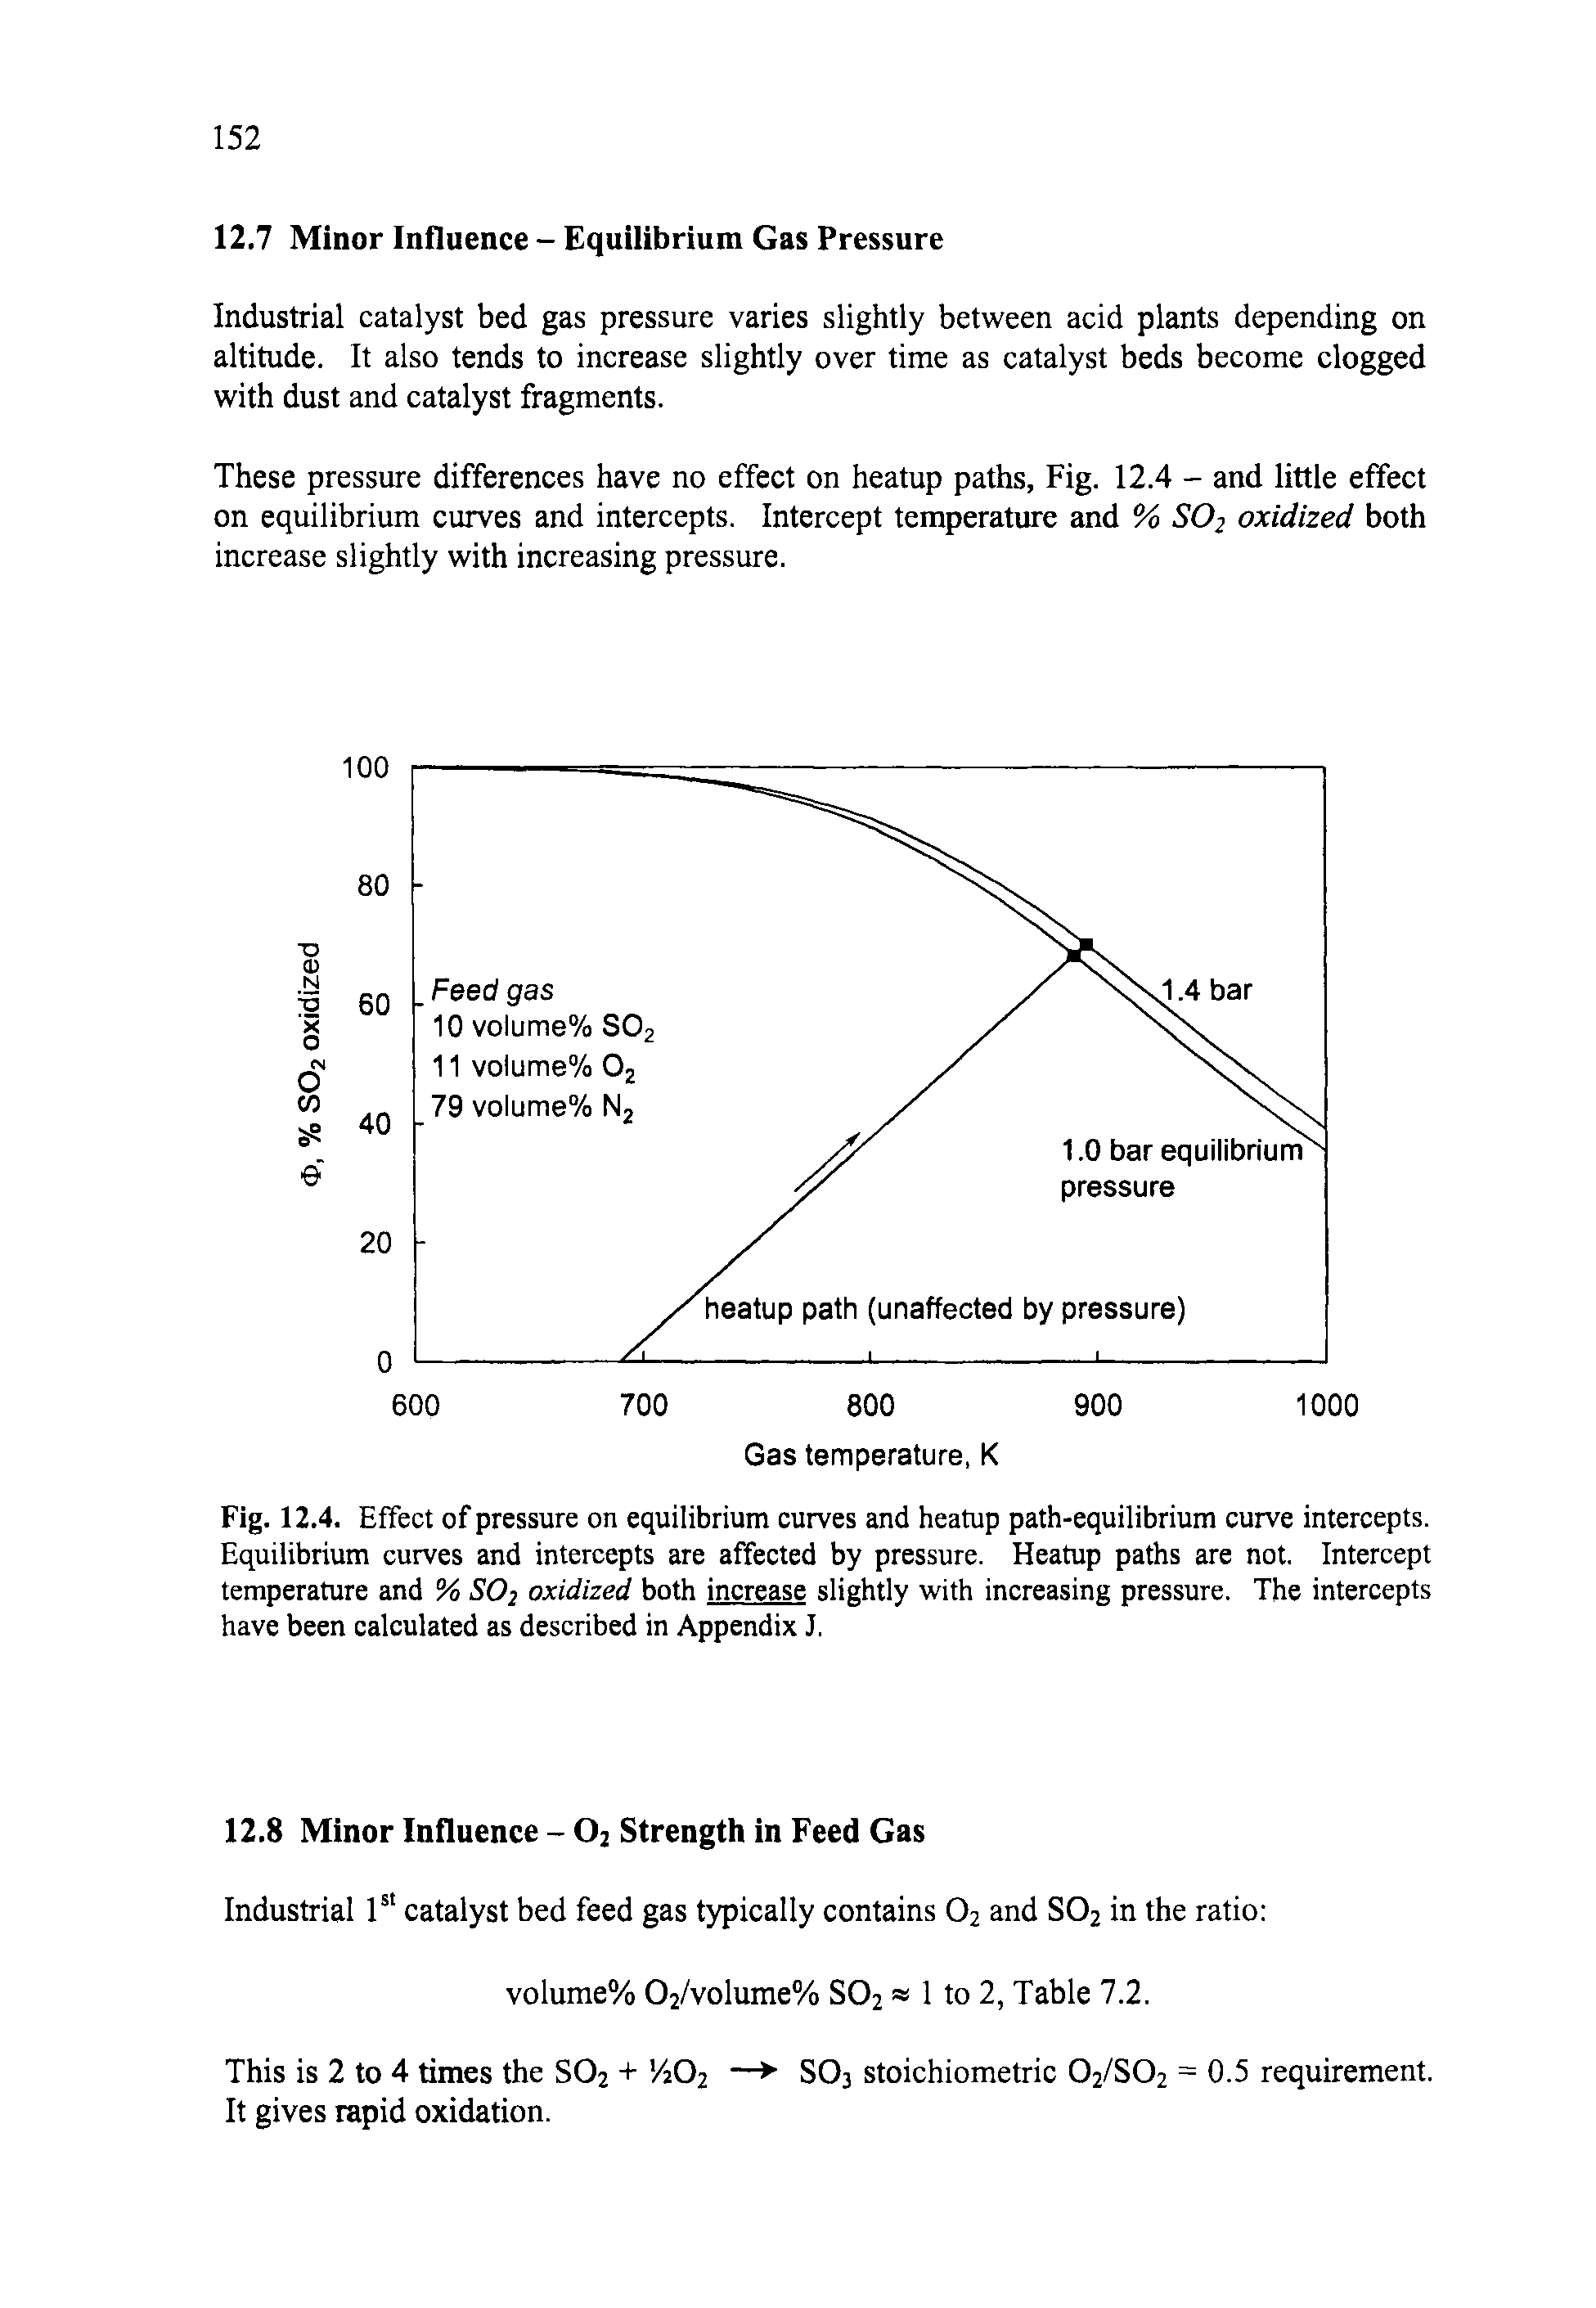 Fig. 12.4. Effect of pressure on equilibrium curves and heatup path-equilibrium curve intercepts. Equilibrium curves and intercepts are affected by pressure. Heatup paths are not. Intercept temperature and % S02 oxidized both increase slightly with increasing pressure. The intercepts have been calculated as described in Appendix J.